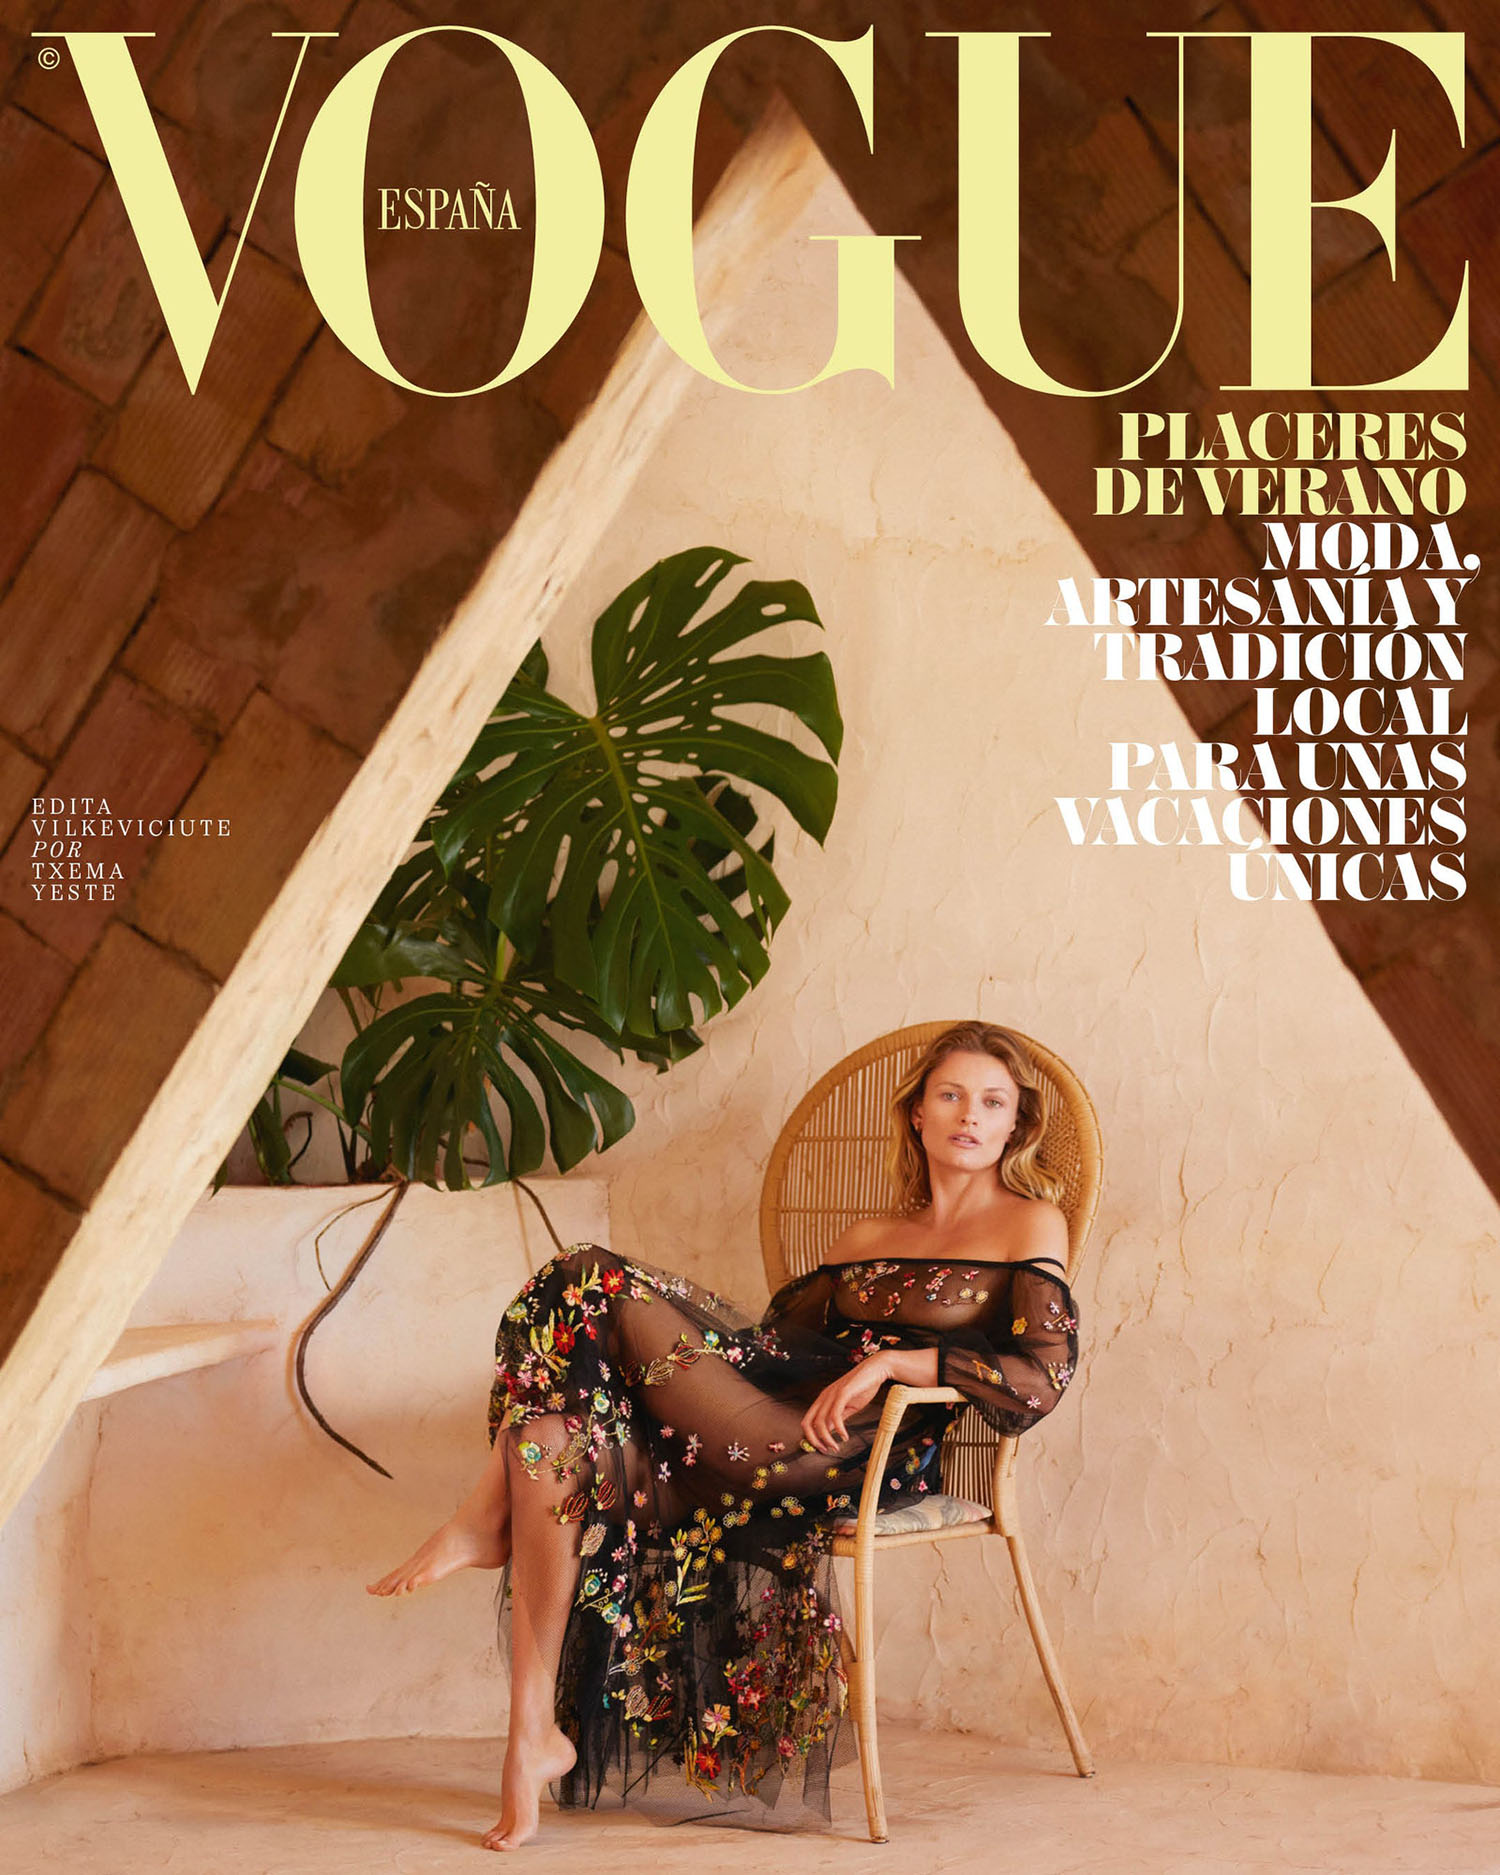 Edita Vilkeviciute covers Vogue Spain July 2021 by Txema Yeste